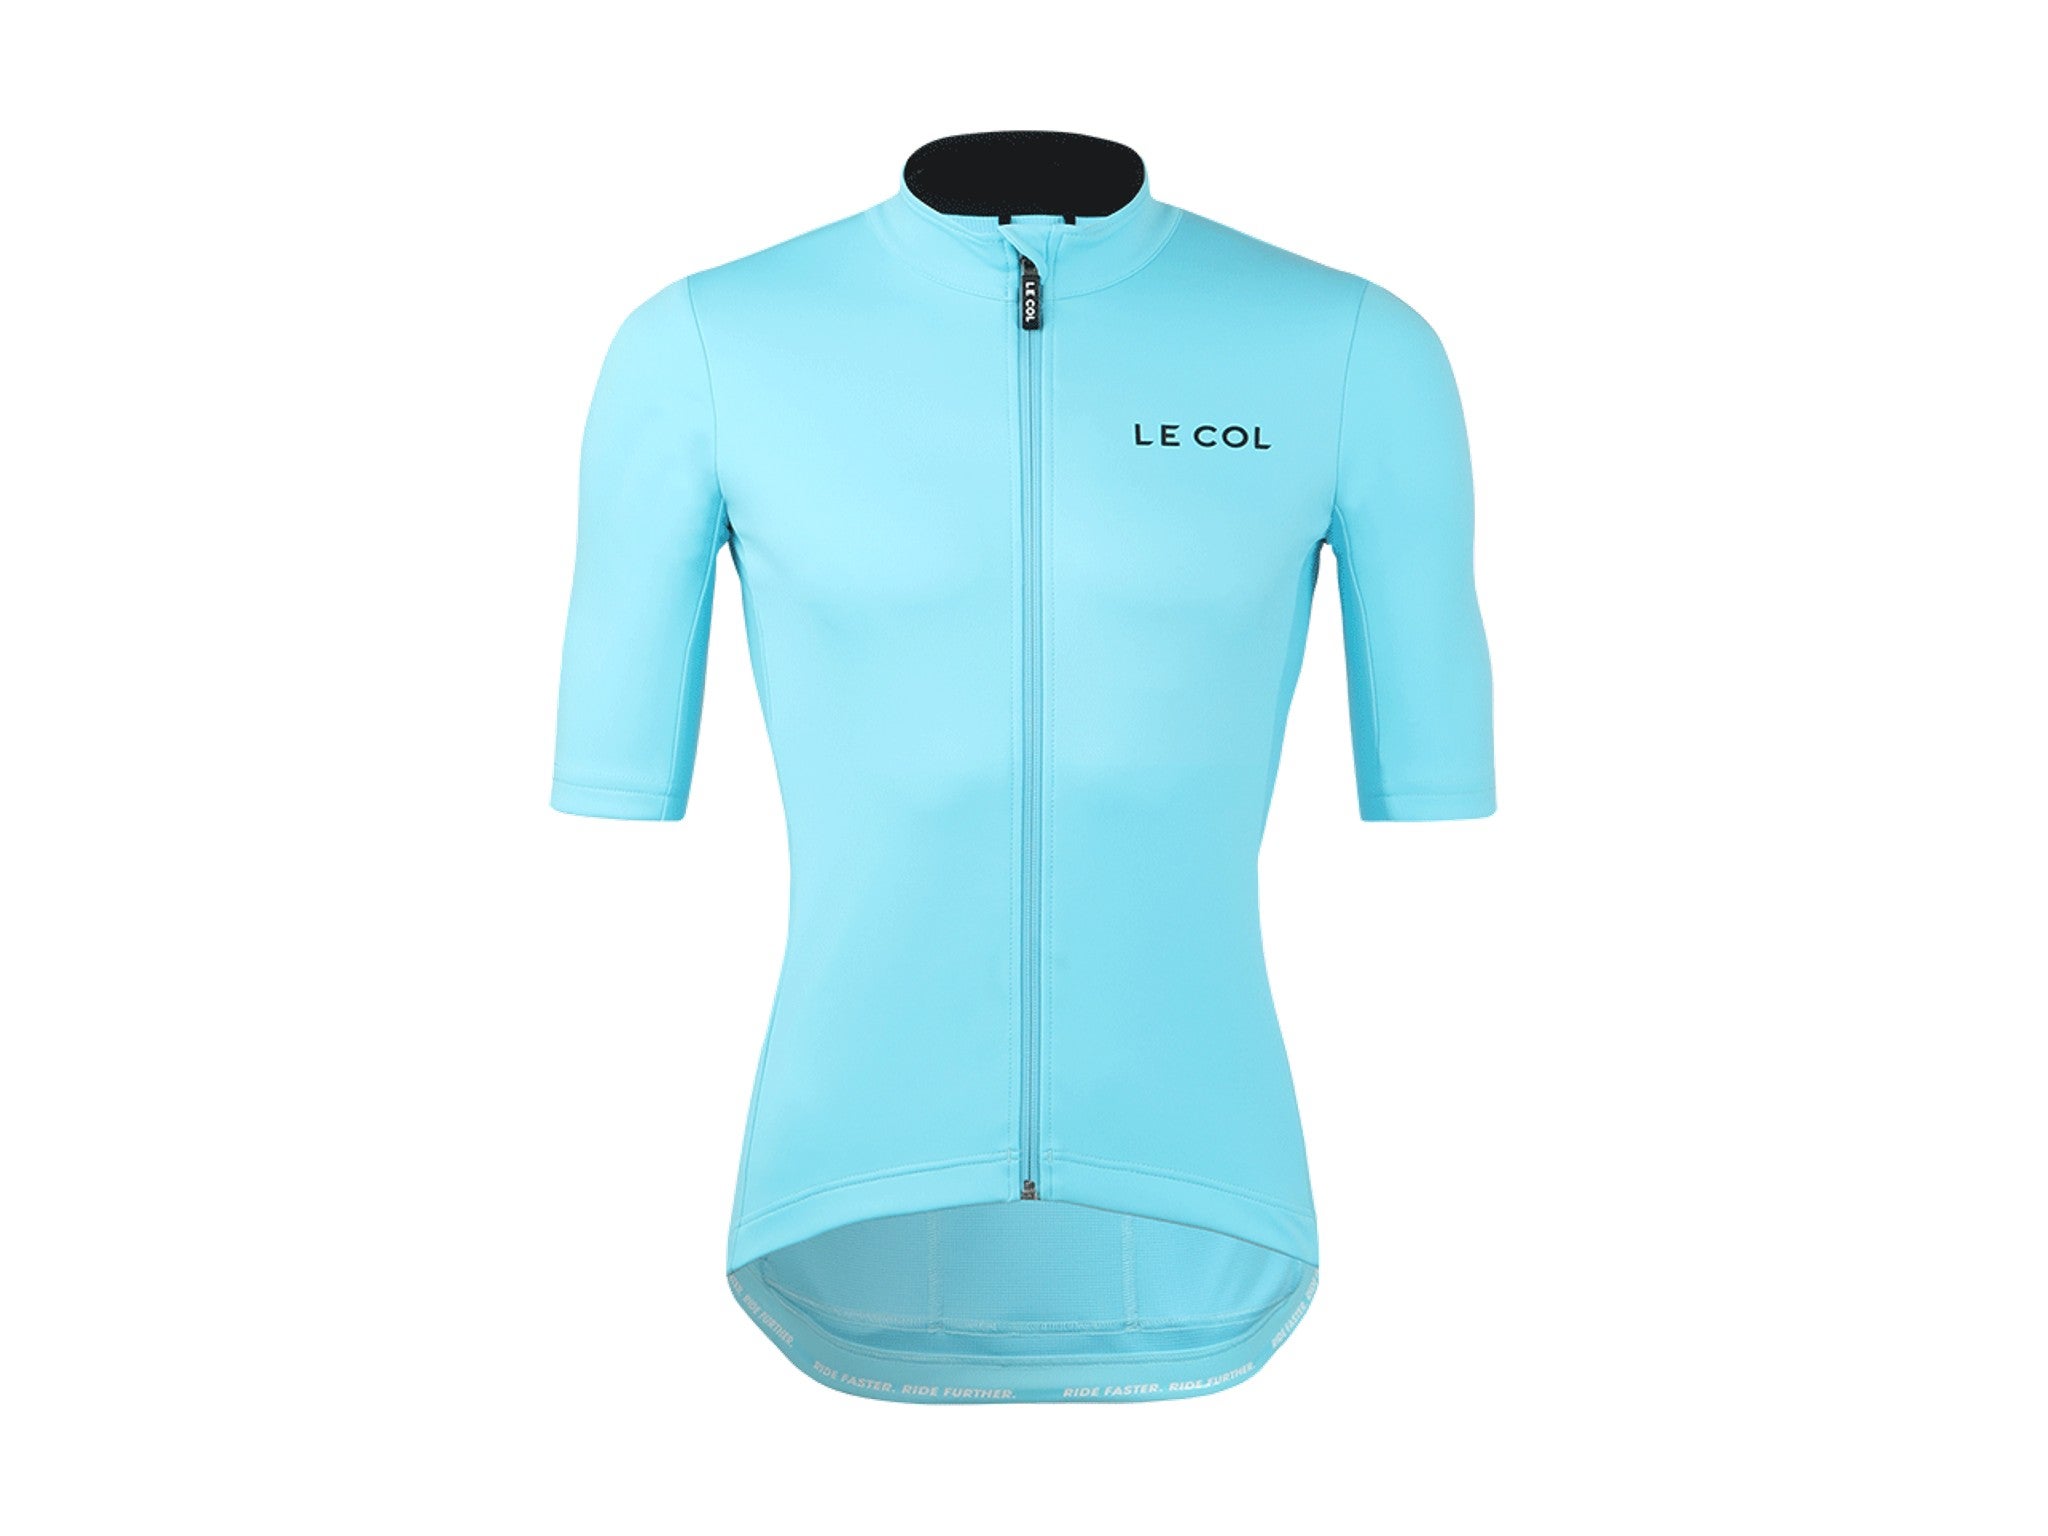 Best cycling jerseys for summer 2022: From UPF sun protection to